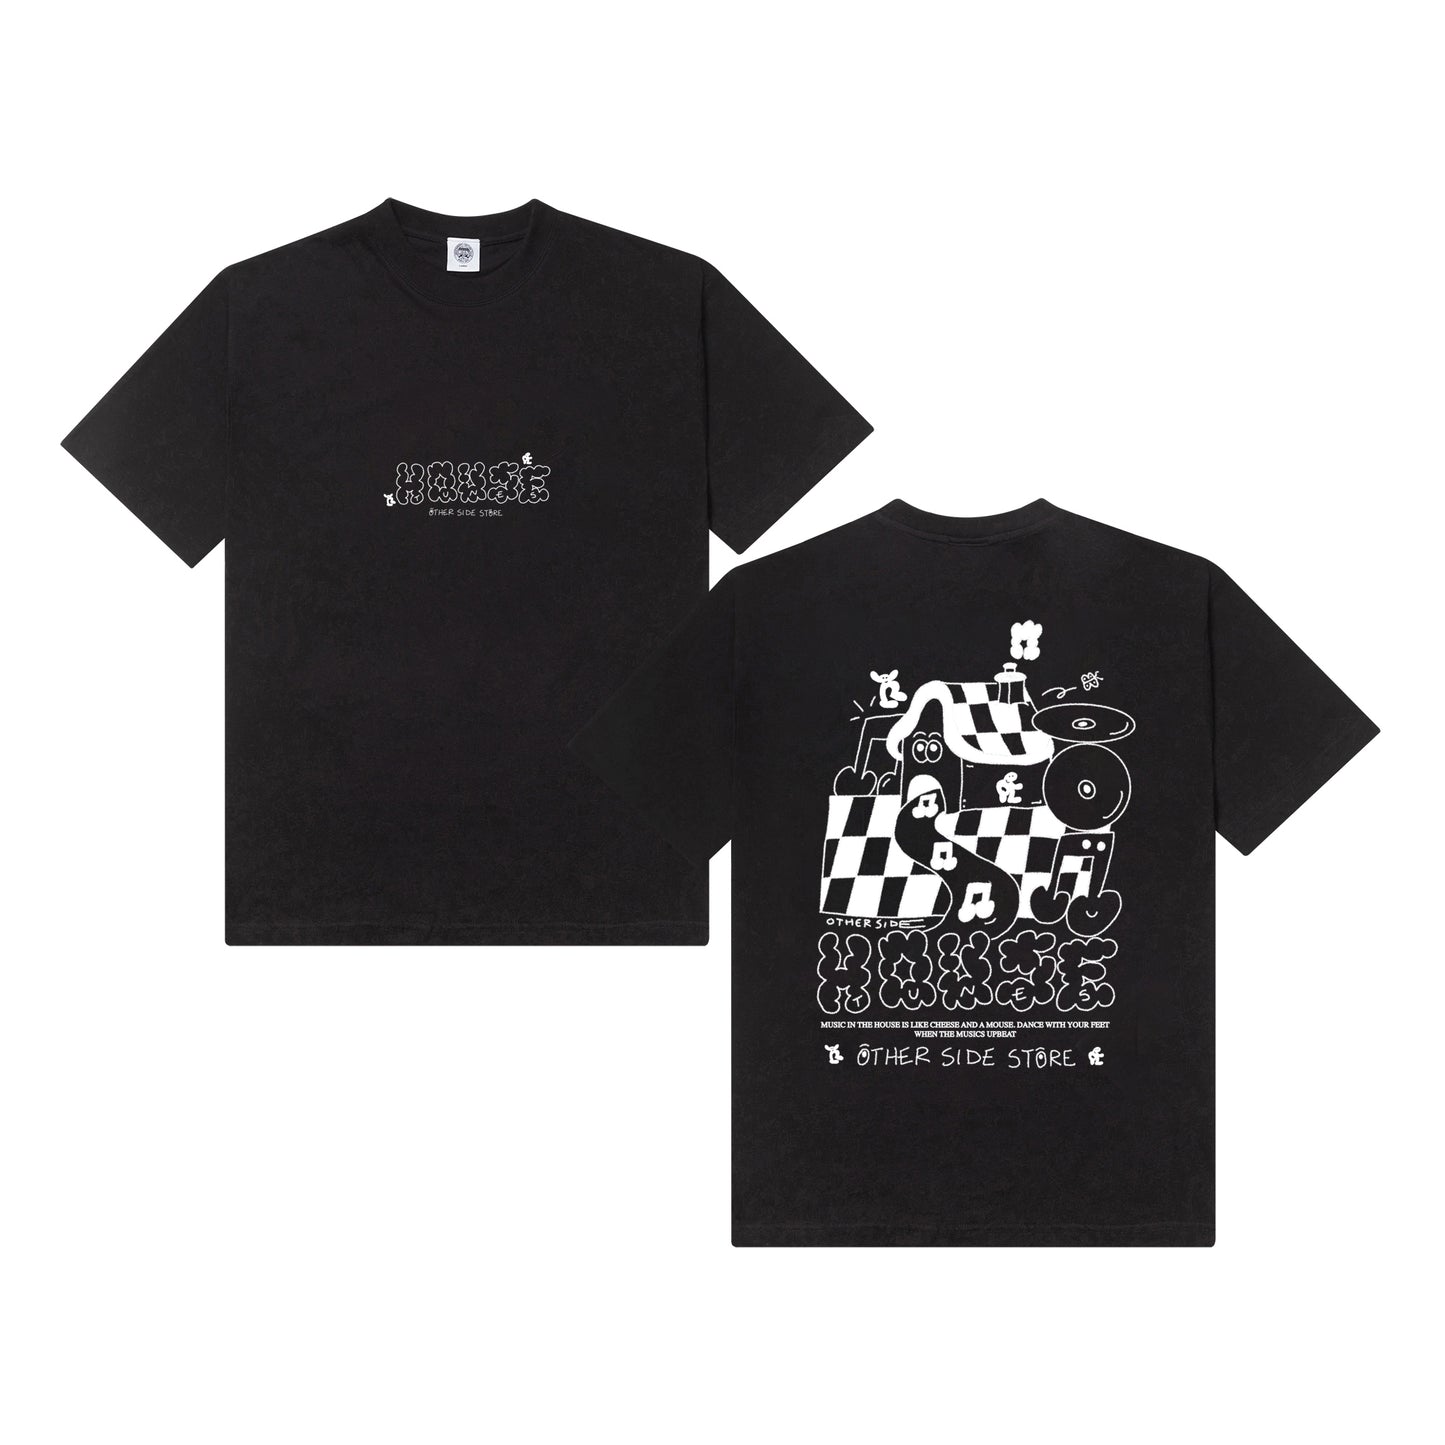 Other Side Store 'House Tunes' Tee - Black *1 OF 100 EXCLUSIVE*